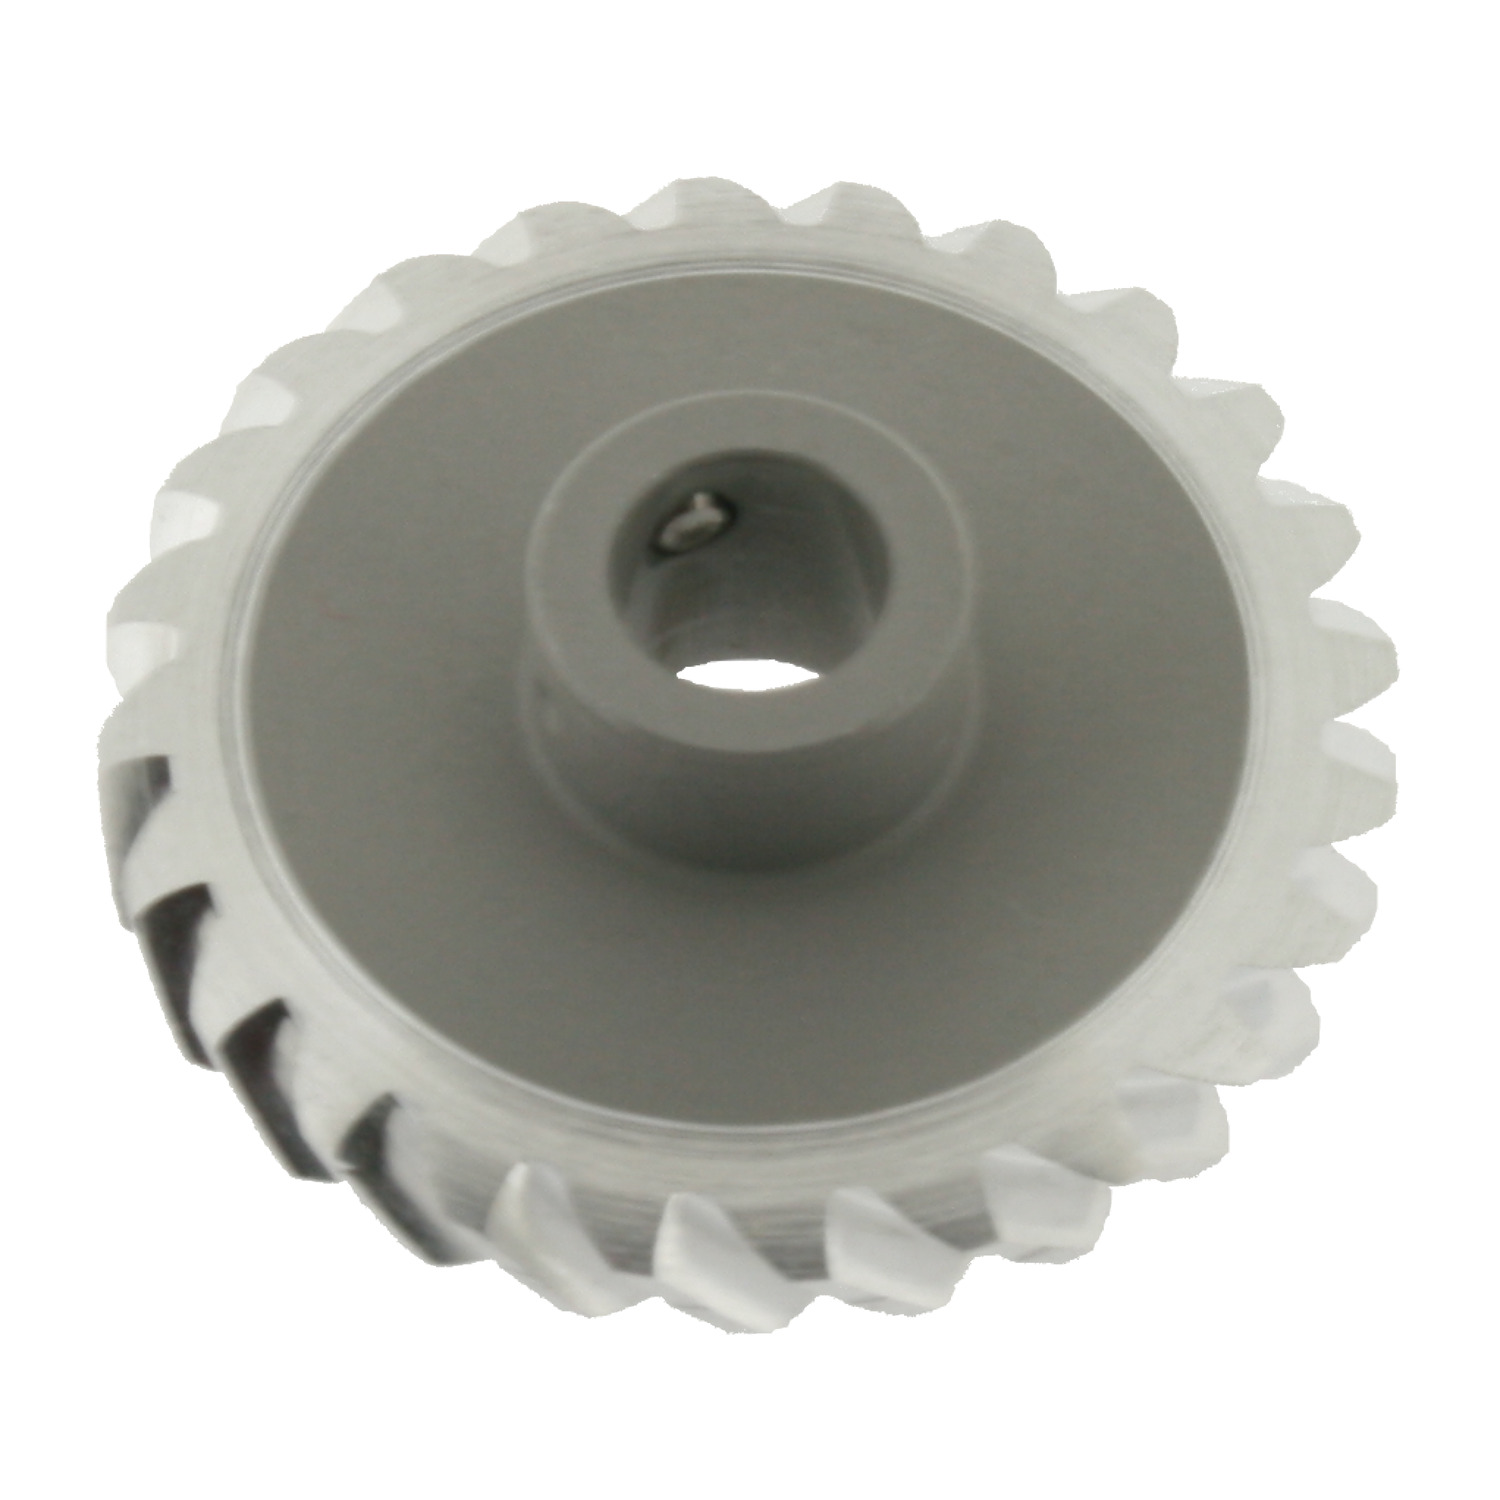 Product R2161, 0,5 Module Left Hand Helical Gears stainless steel, pin hub / 